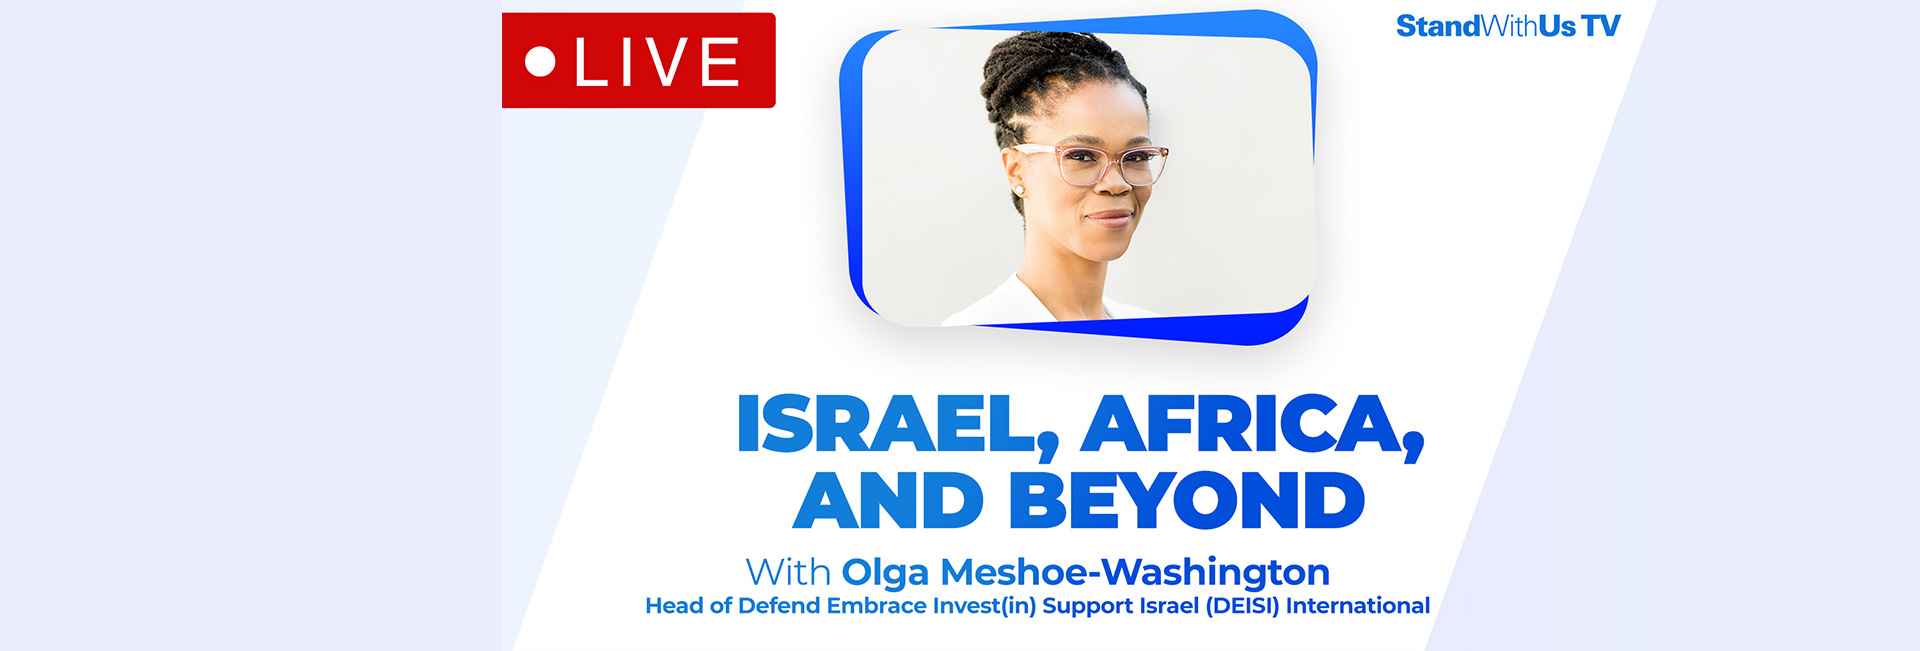 Israel, Africa, and Beyond